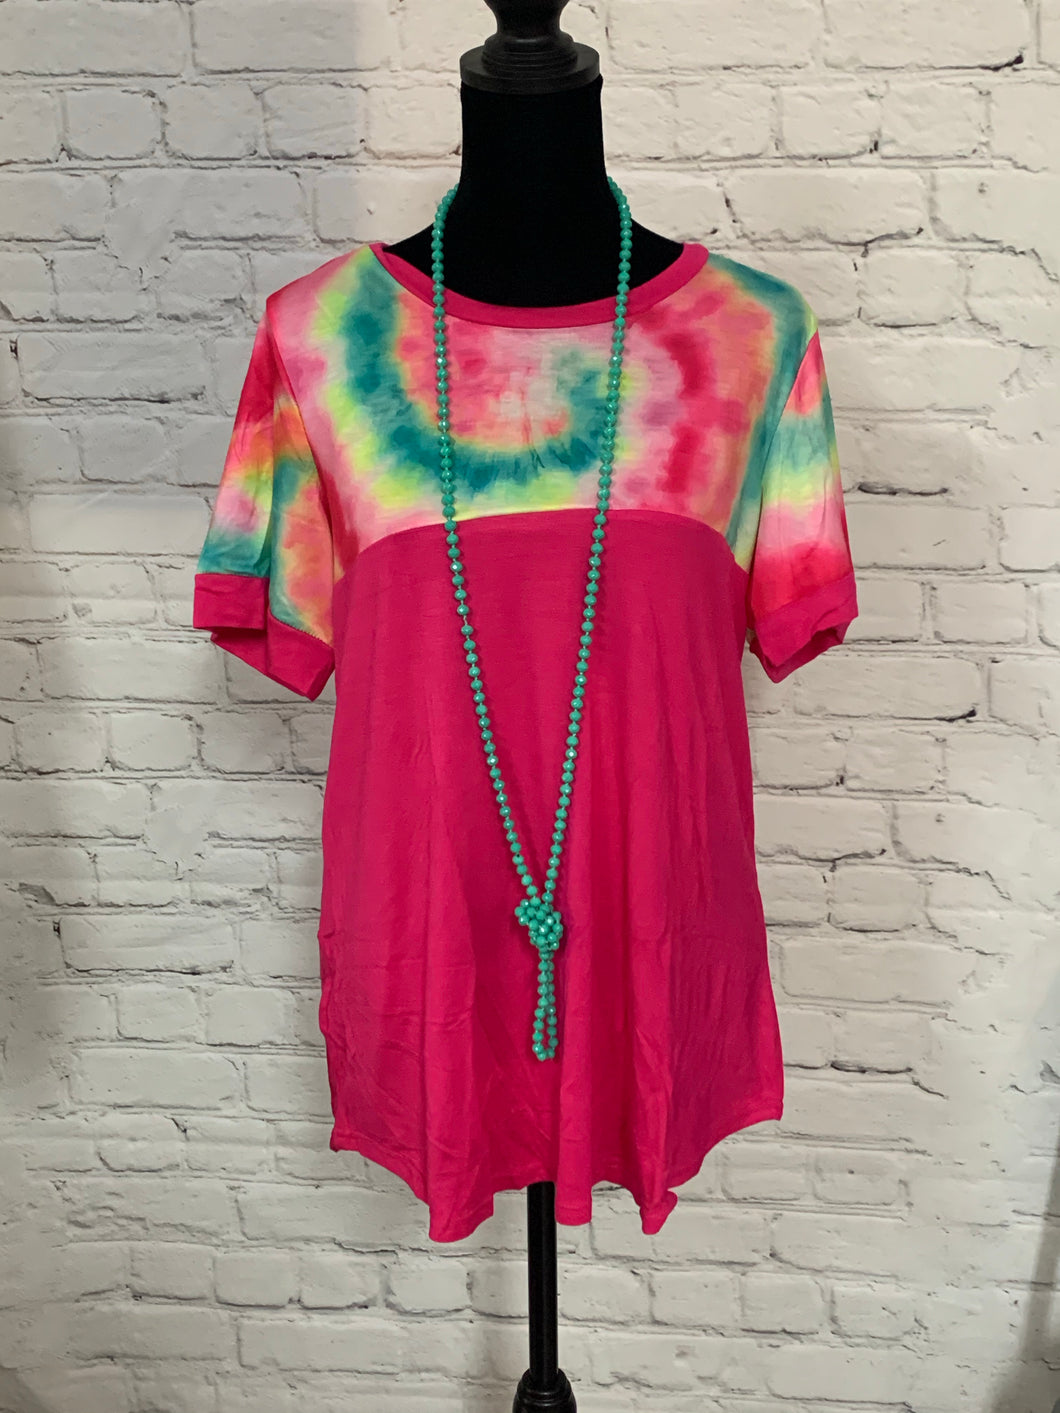 Pink top with w/ tie dye print